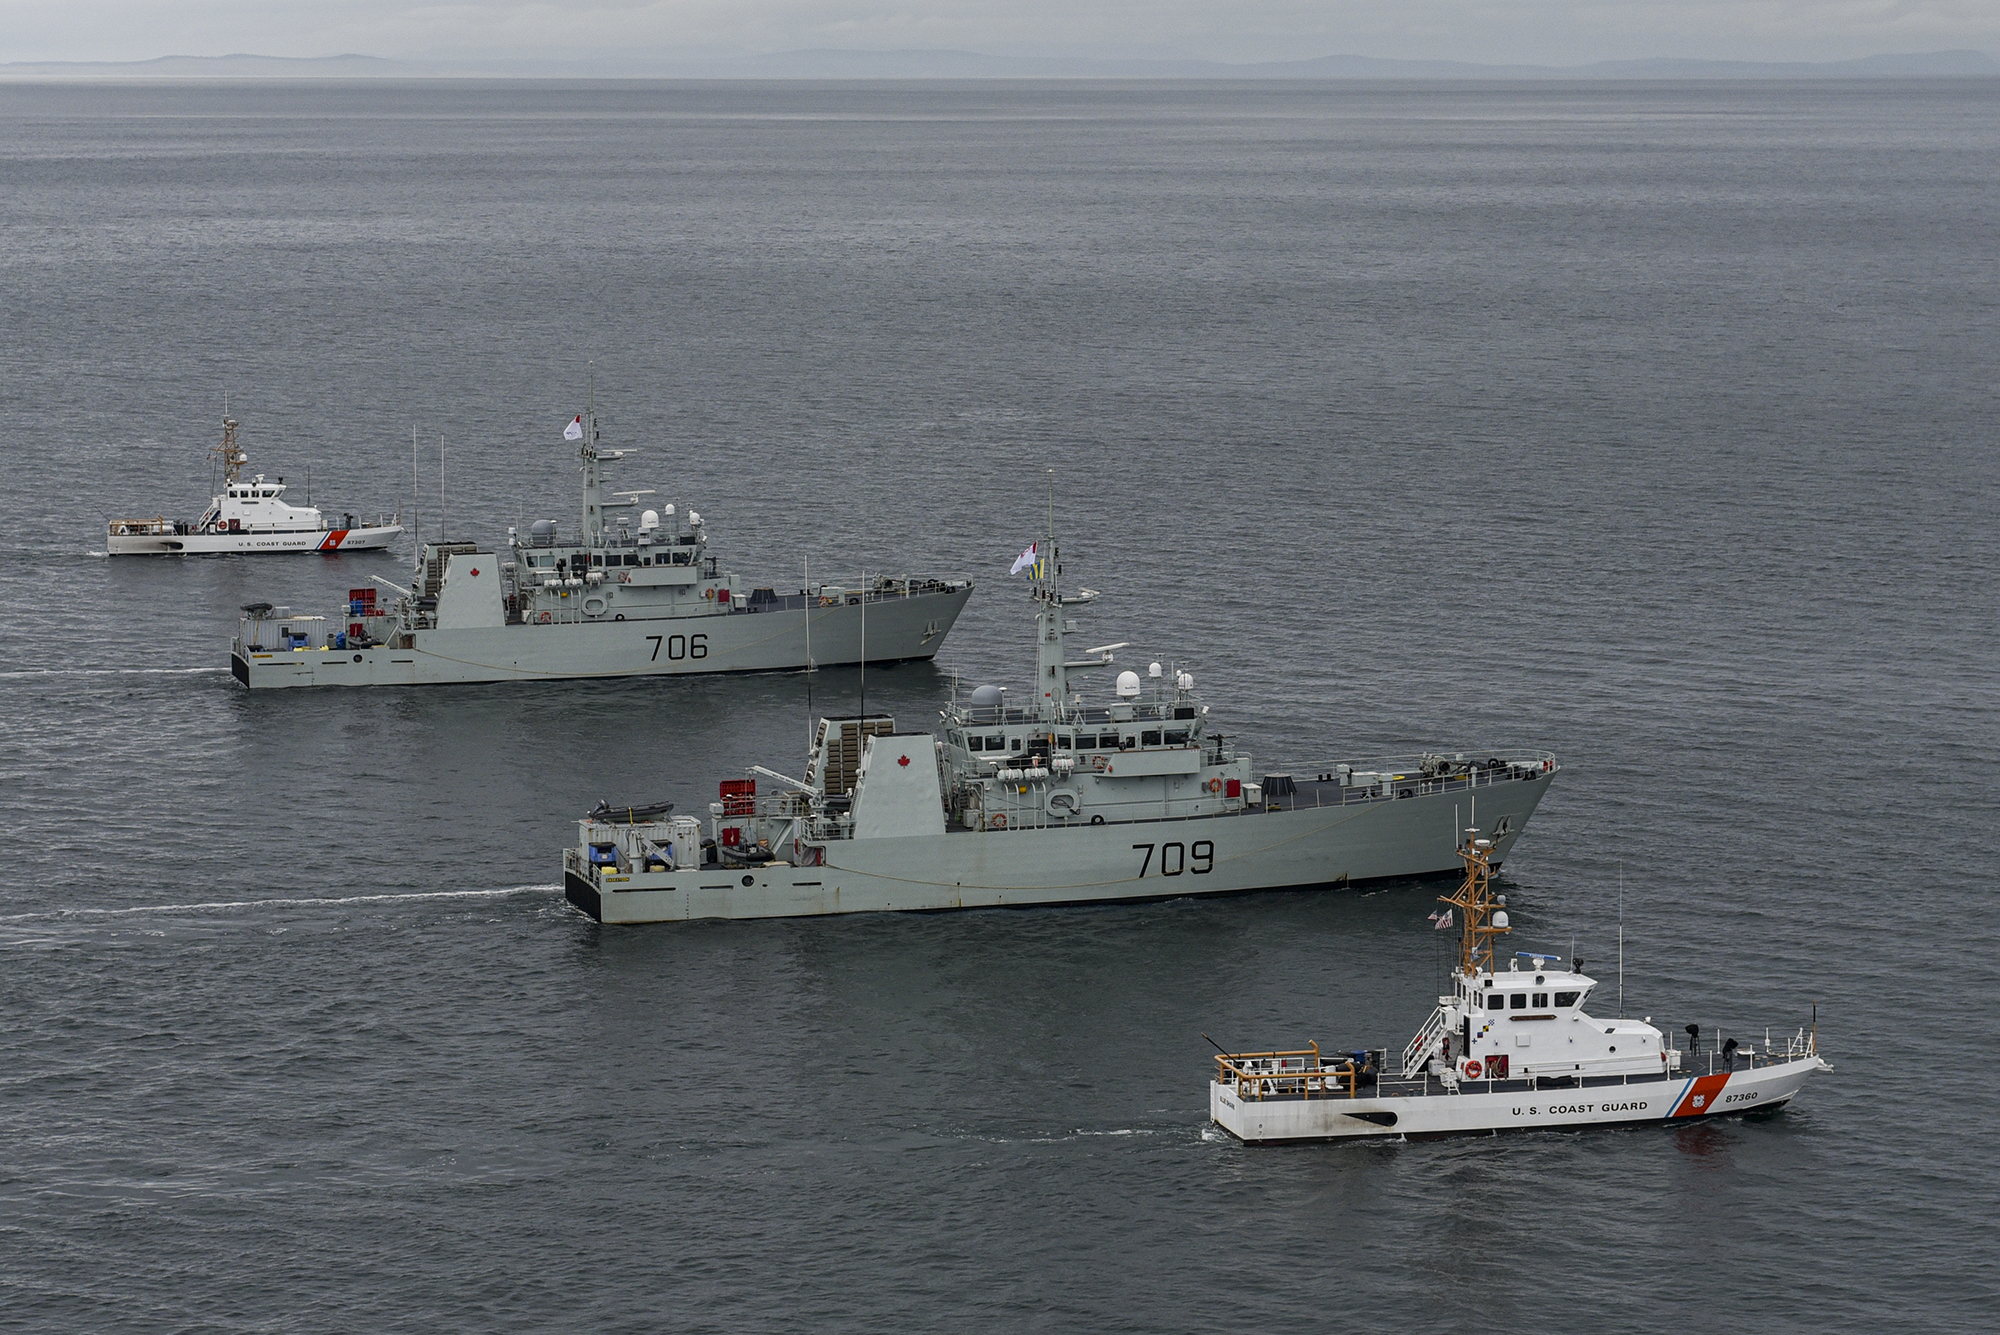 U.S. Coast Guard Cutter Blue Shark [WPB 87360] and U.S. Coast Guard Cutter Osprey [WPB 87307] flank HMCS Saskatoon and HMCS Yellowknife from the Royal Canadian Navy during a joint exercise in the Salish Sea on Feb. 17, 2022. The exercise was conducted to train and prepare Royal Canadian Navy crews for deployments to support United States counter-narcotics operations. Photo: U.S. Coast Guard